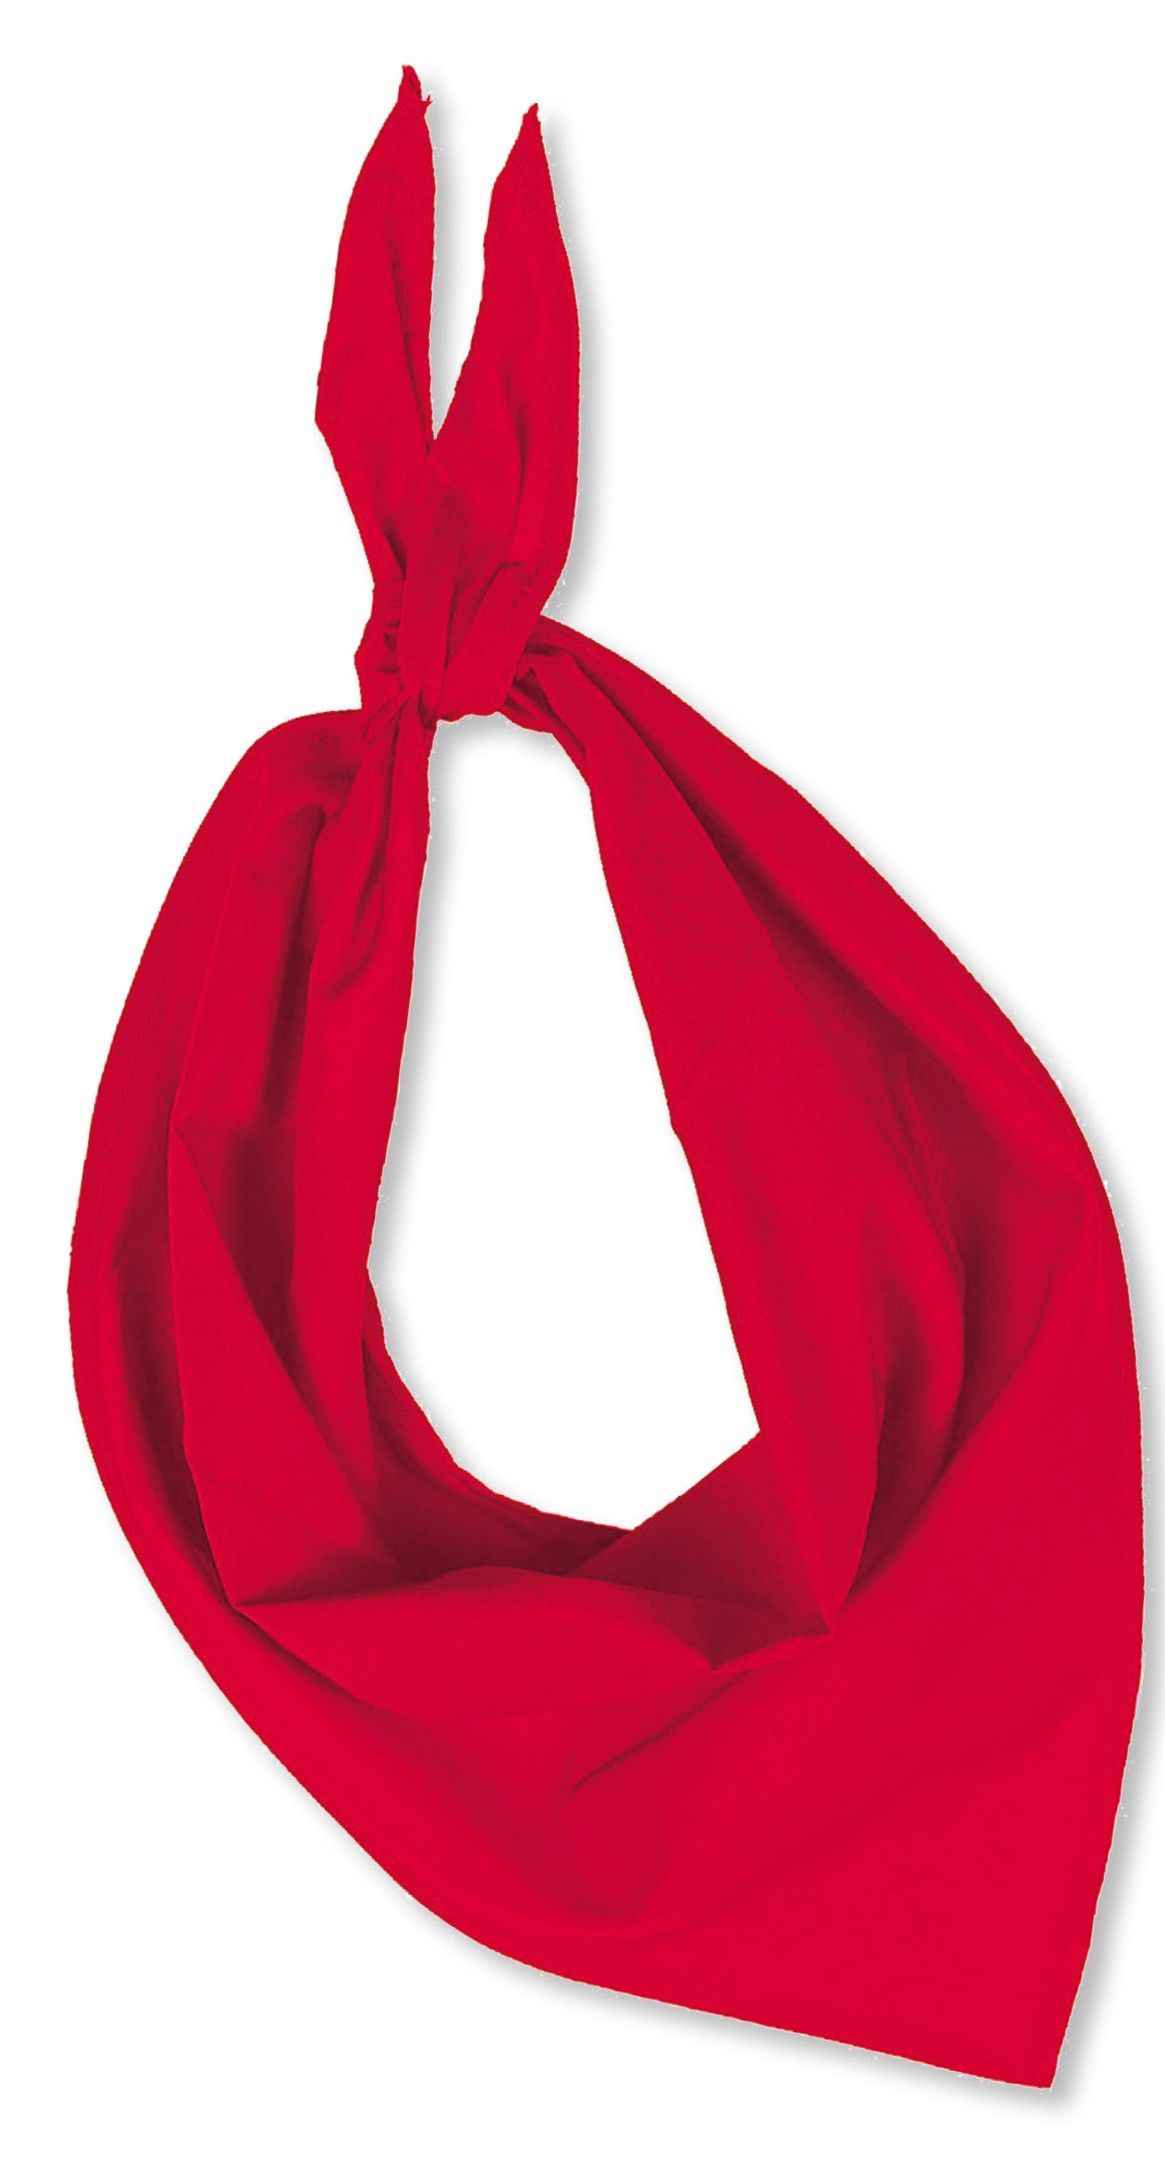 6 FOULARDS TRIANGULAIRES ROUGE